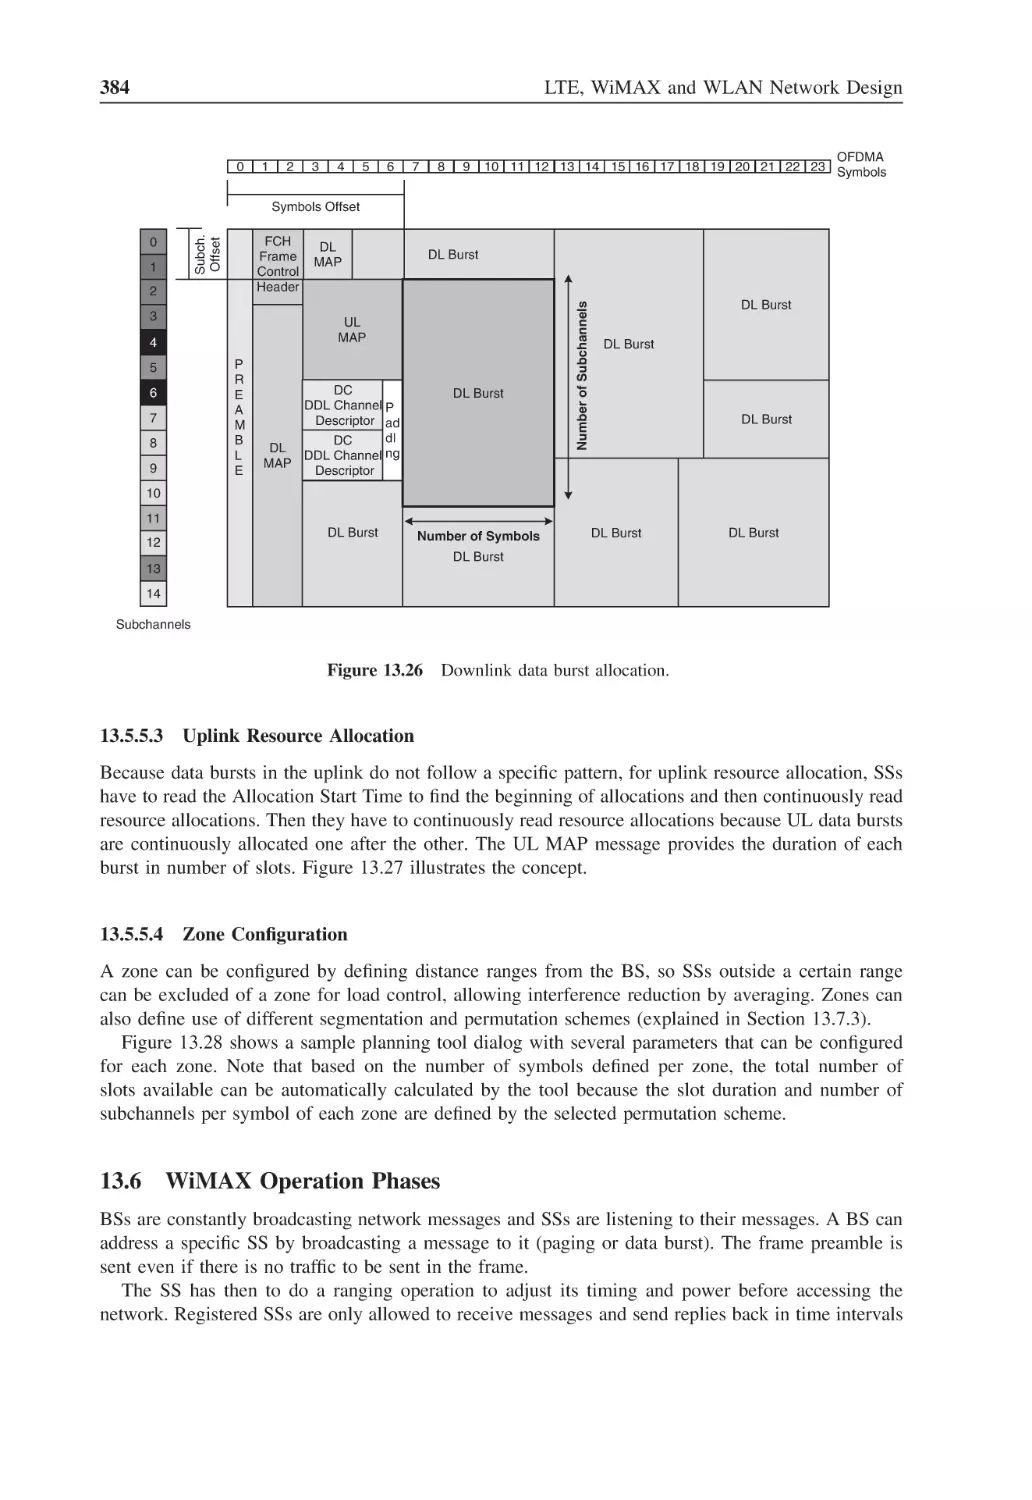 13.6 WiMAX Operation Phases